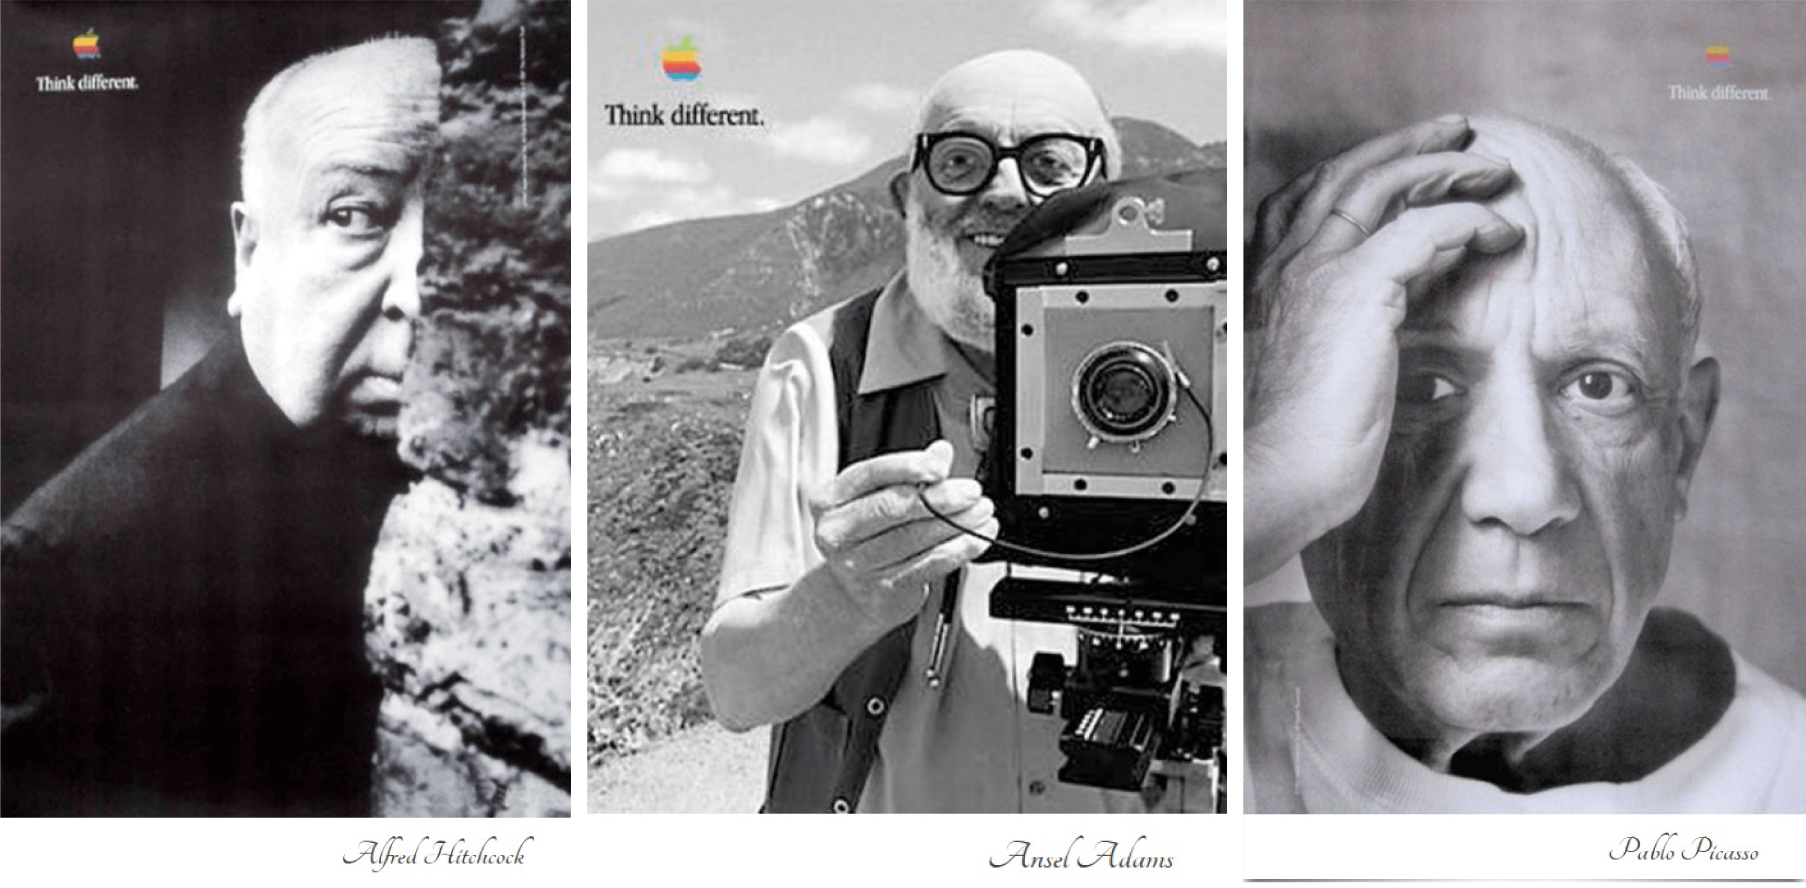 Three Apple print advertisements for their "Think different" campaign featuring director Alfred Hitchcock, photographer Ansel Adams and painter Pablo Picasso.